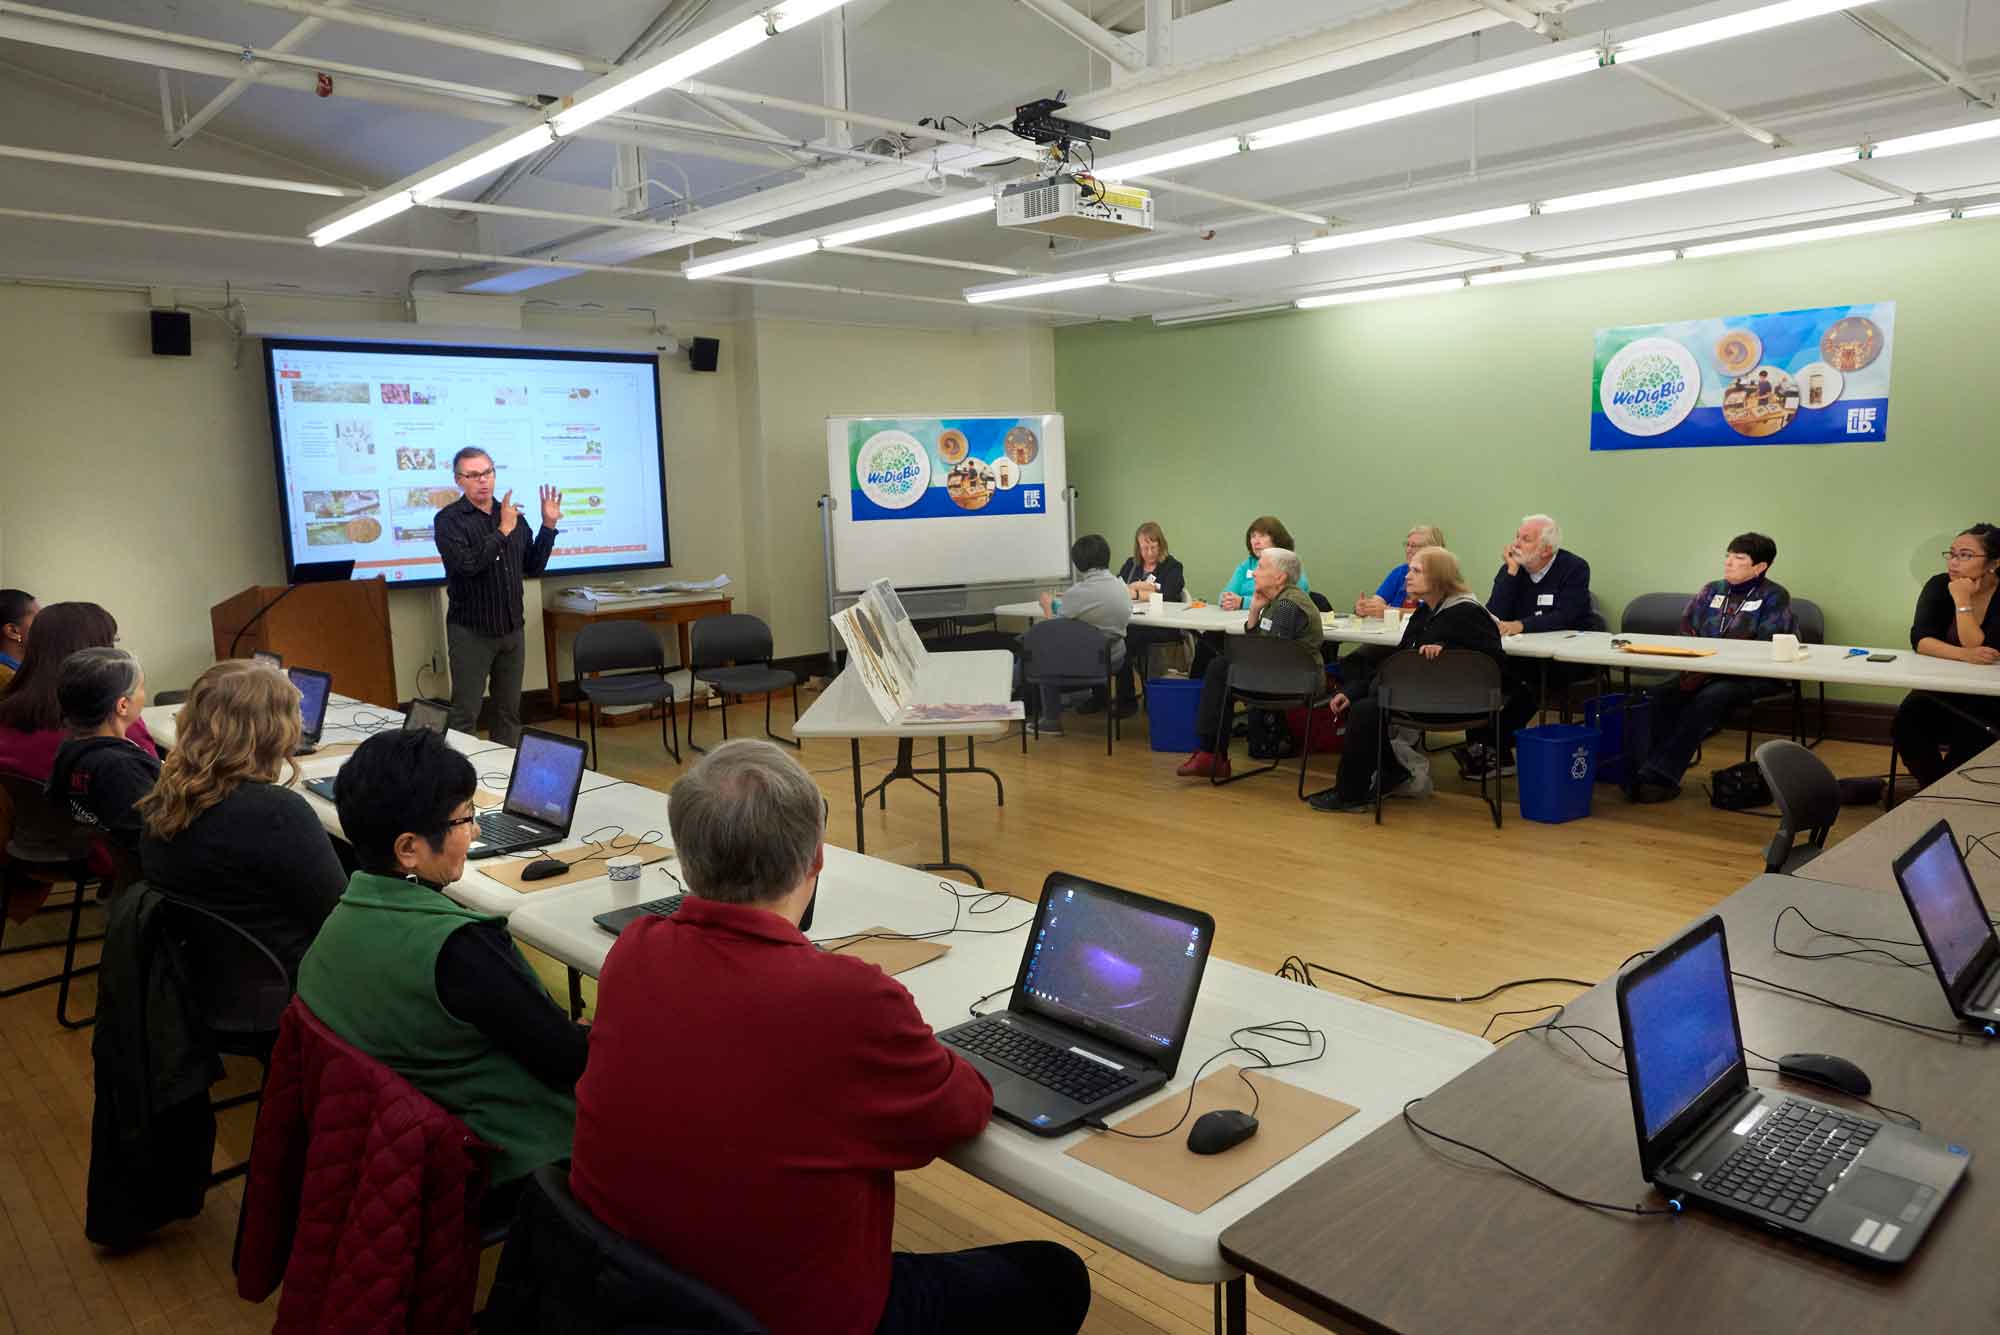 A group of volunteers gather in a classroom to digitize collections records. They sit at a set of tables arranged in a U shape. A scientists stands in front of the room, explaining the activities for the day.